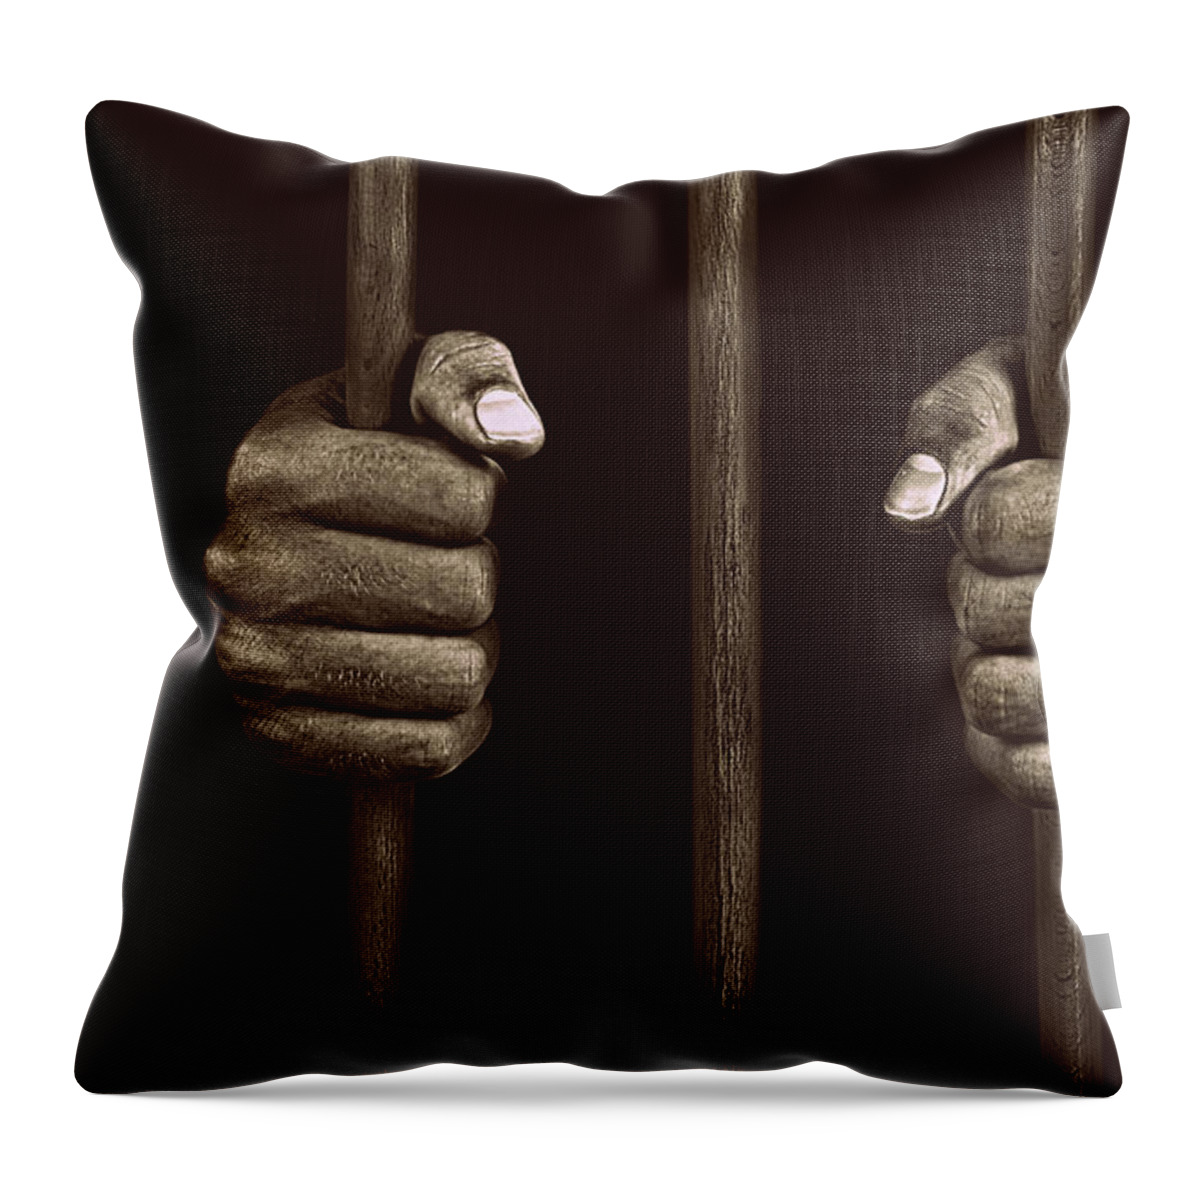 Prison Throw Pillow featuring the photograph In Prison by Chevy Fleet